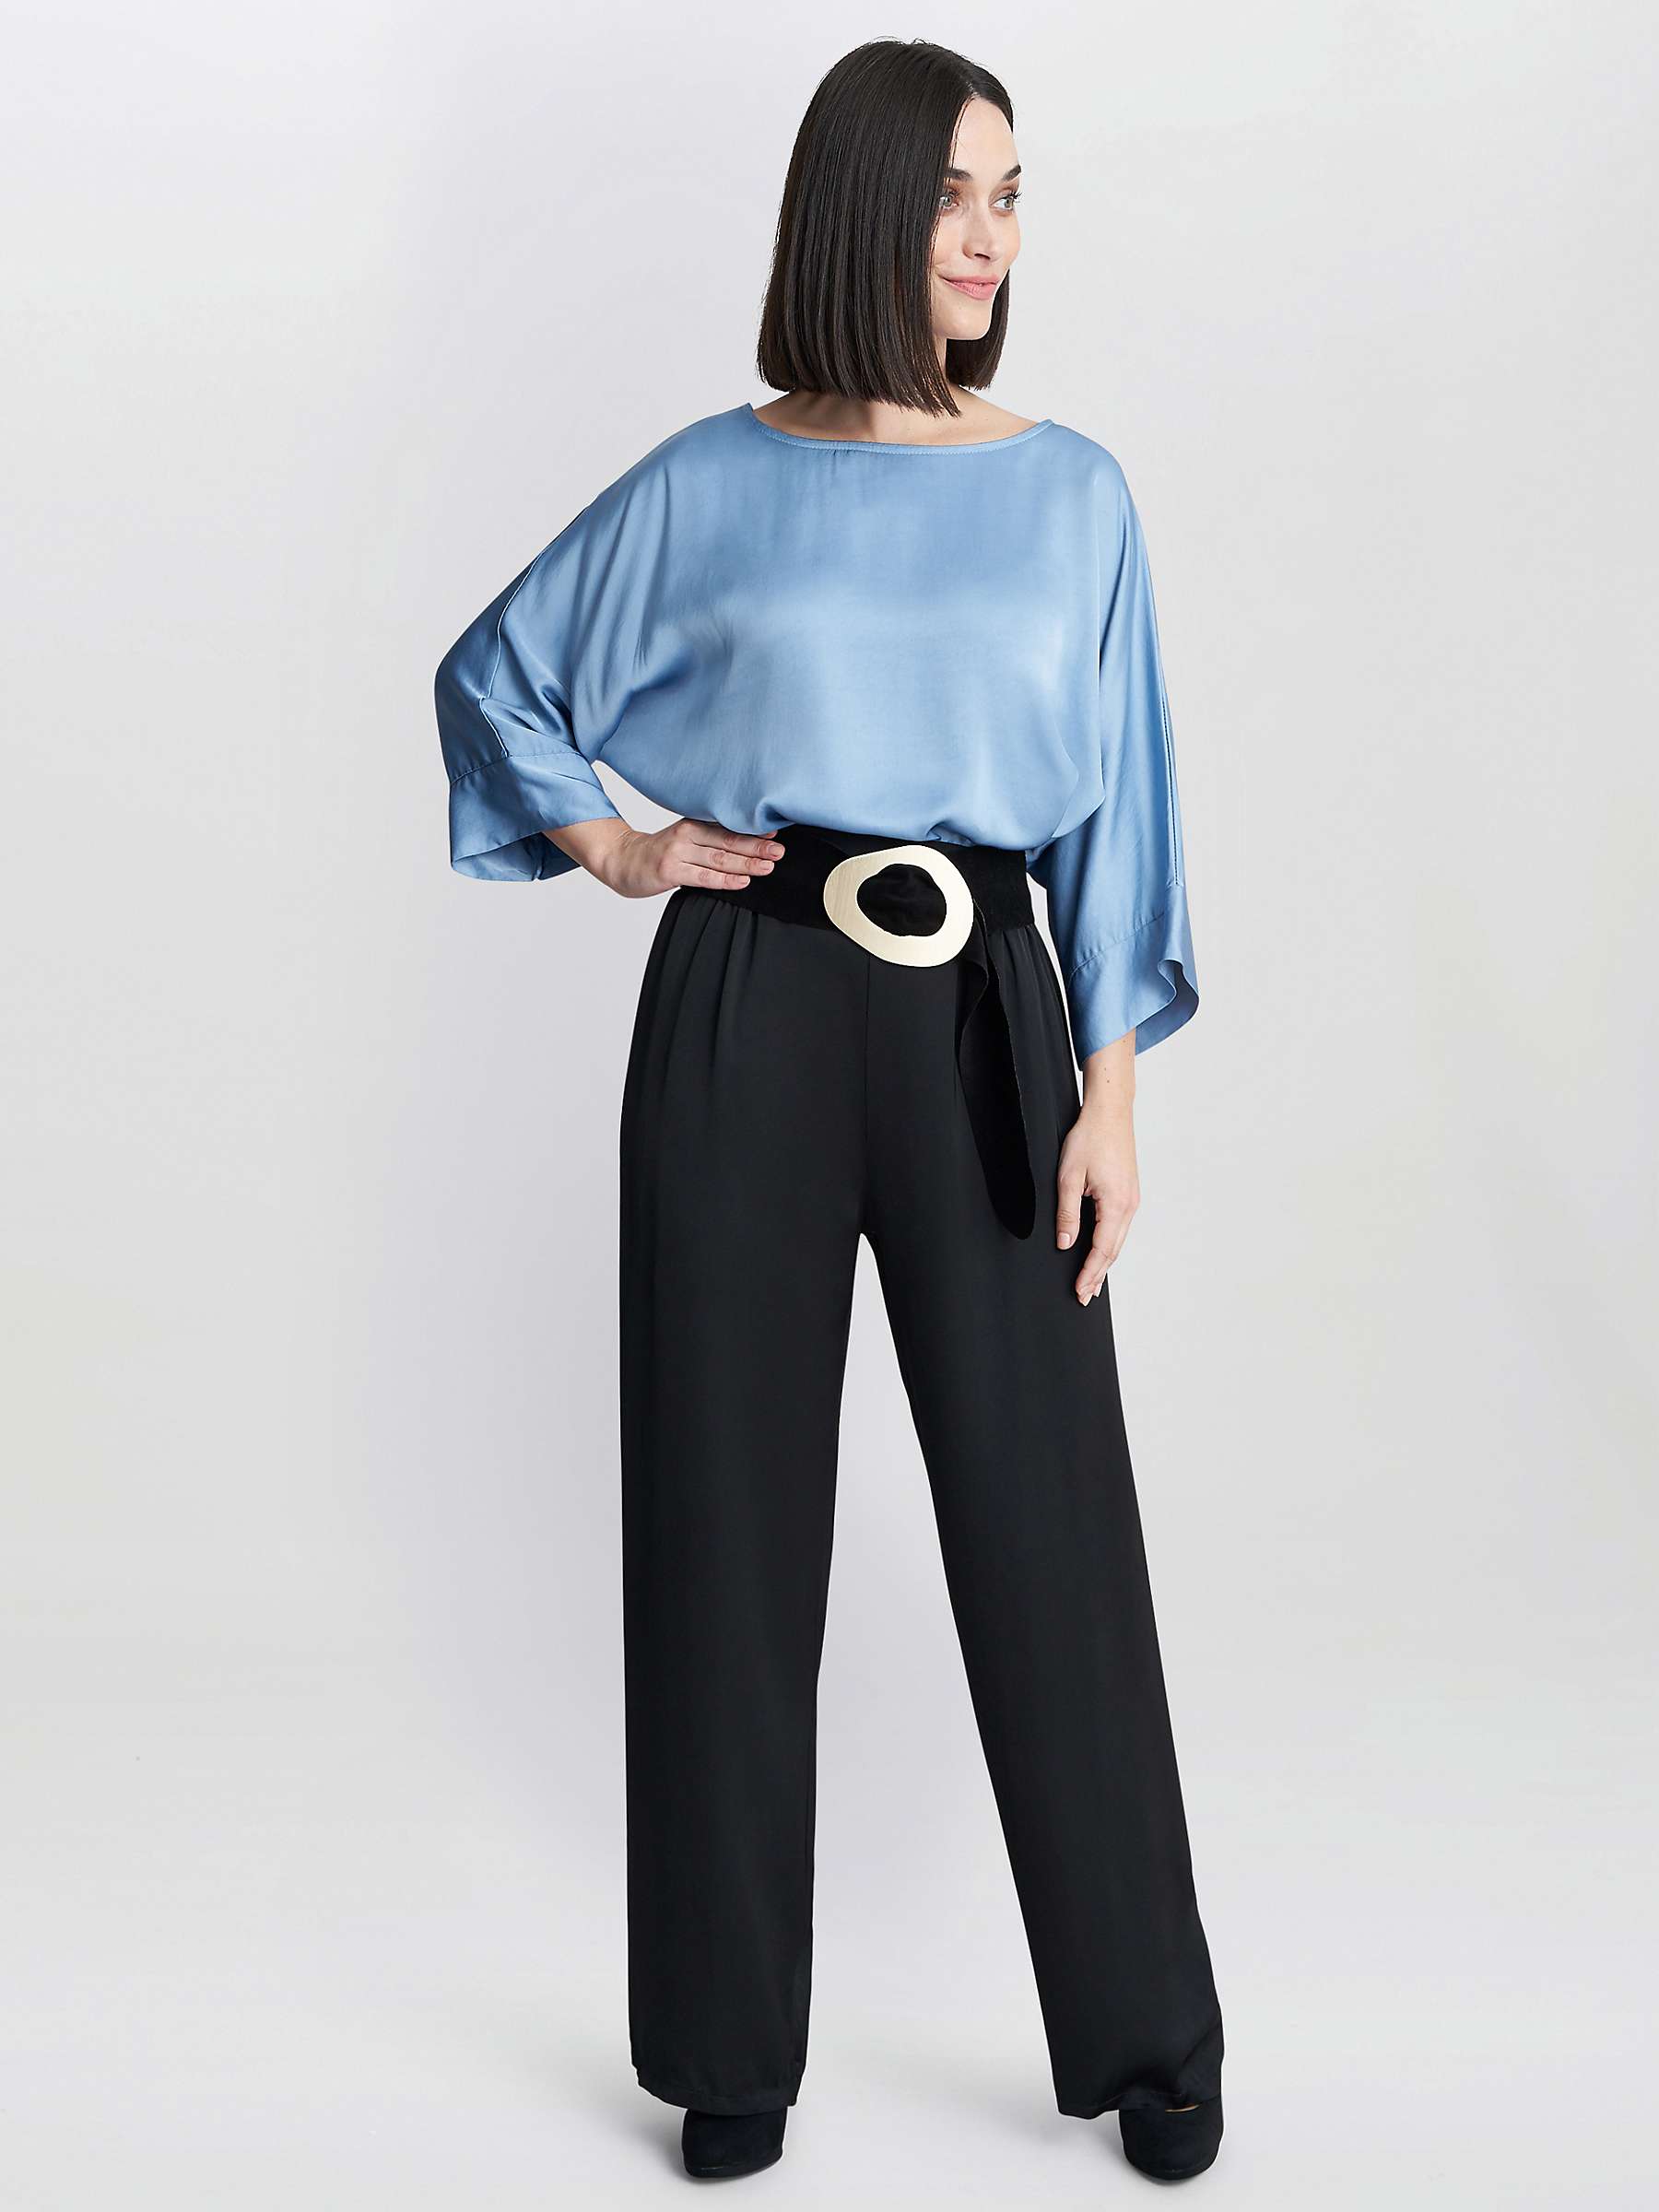 Buy Gina Bacconi Juno Washed Satin Pull On Trousers, Black Online at johnlewis.com